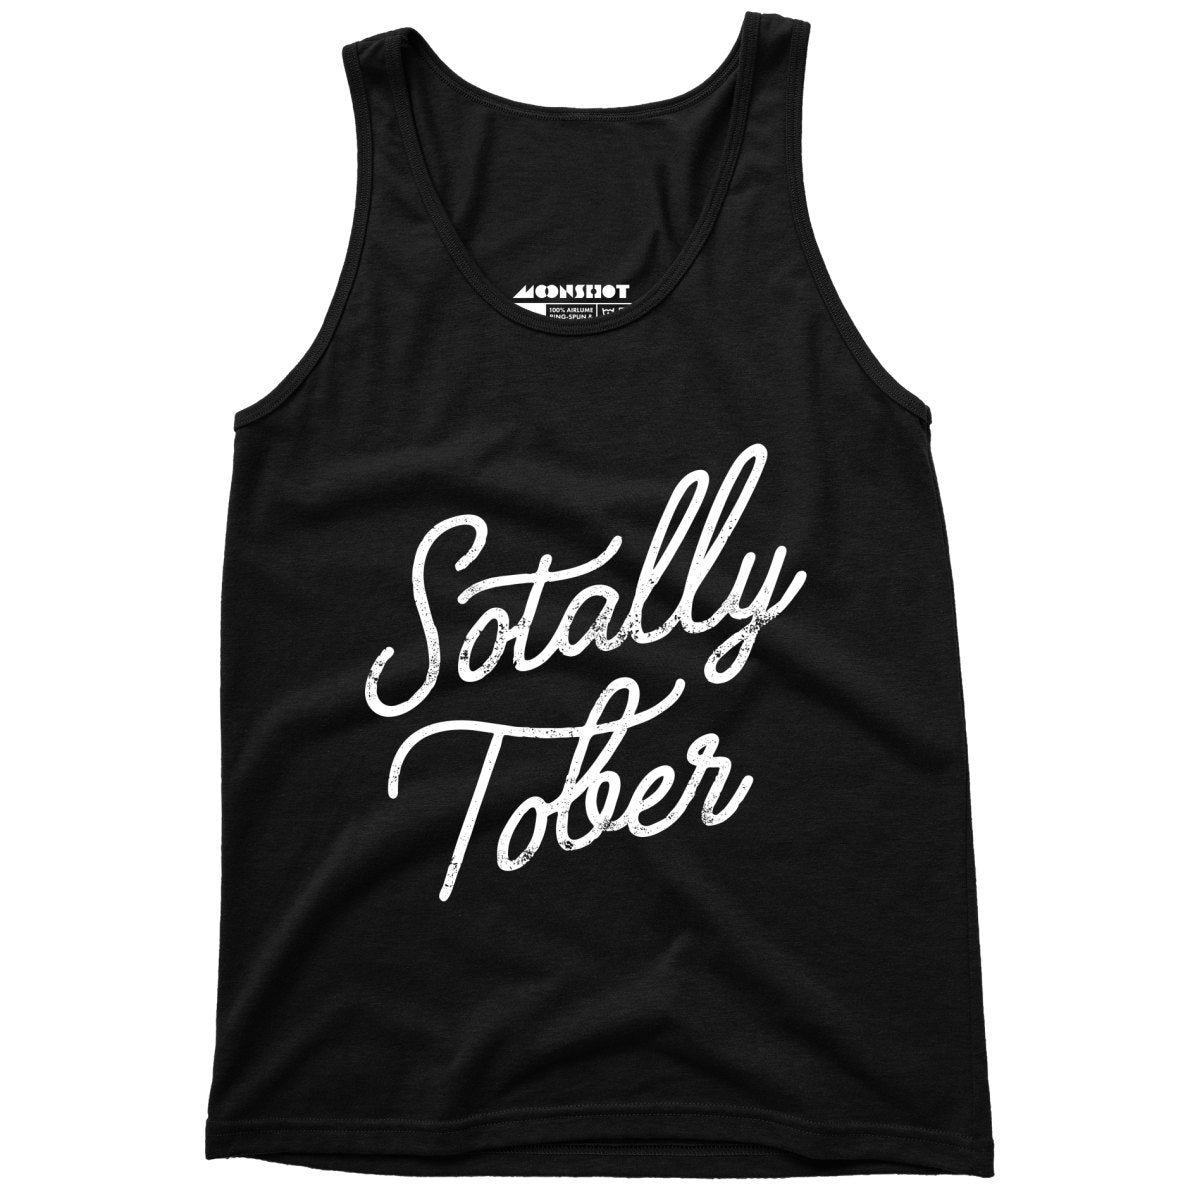 Sotally Tober - Unisex Tank Top